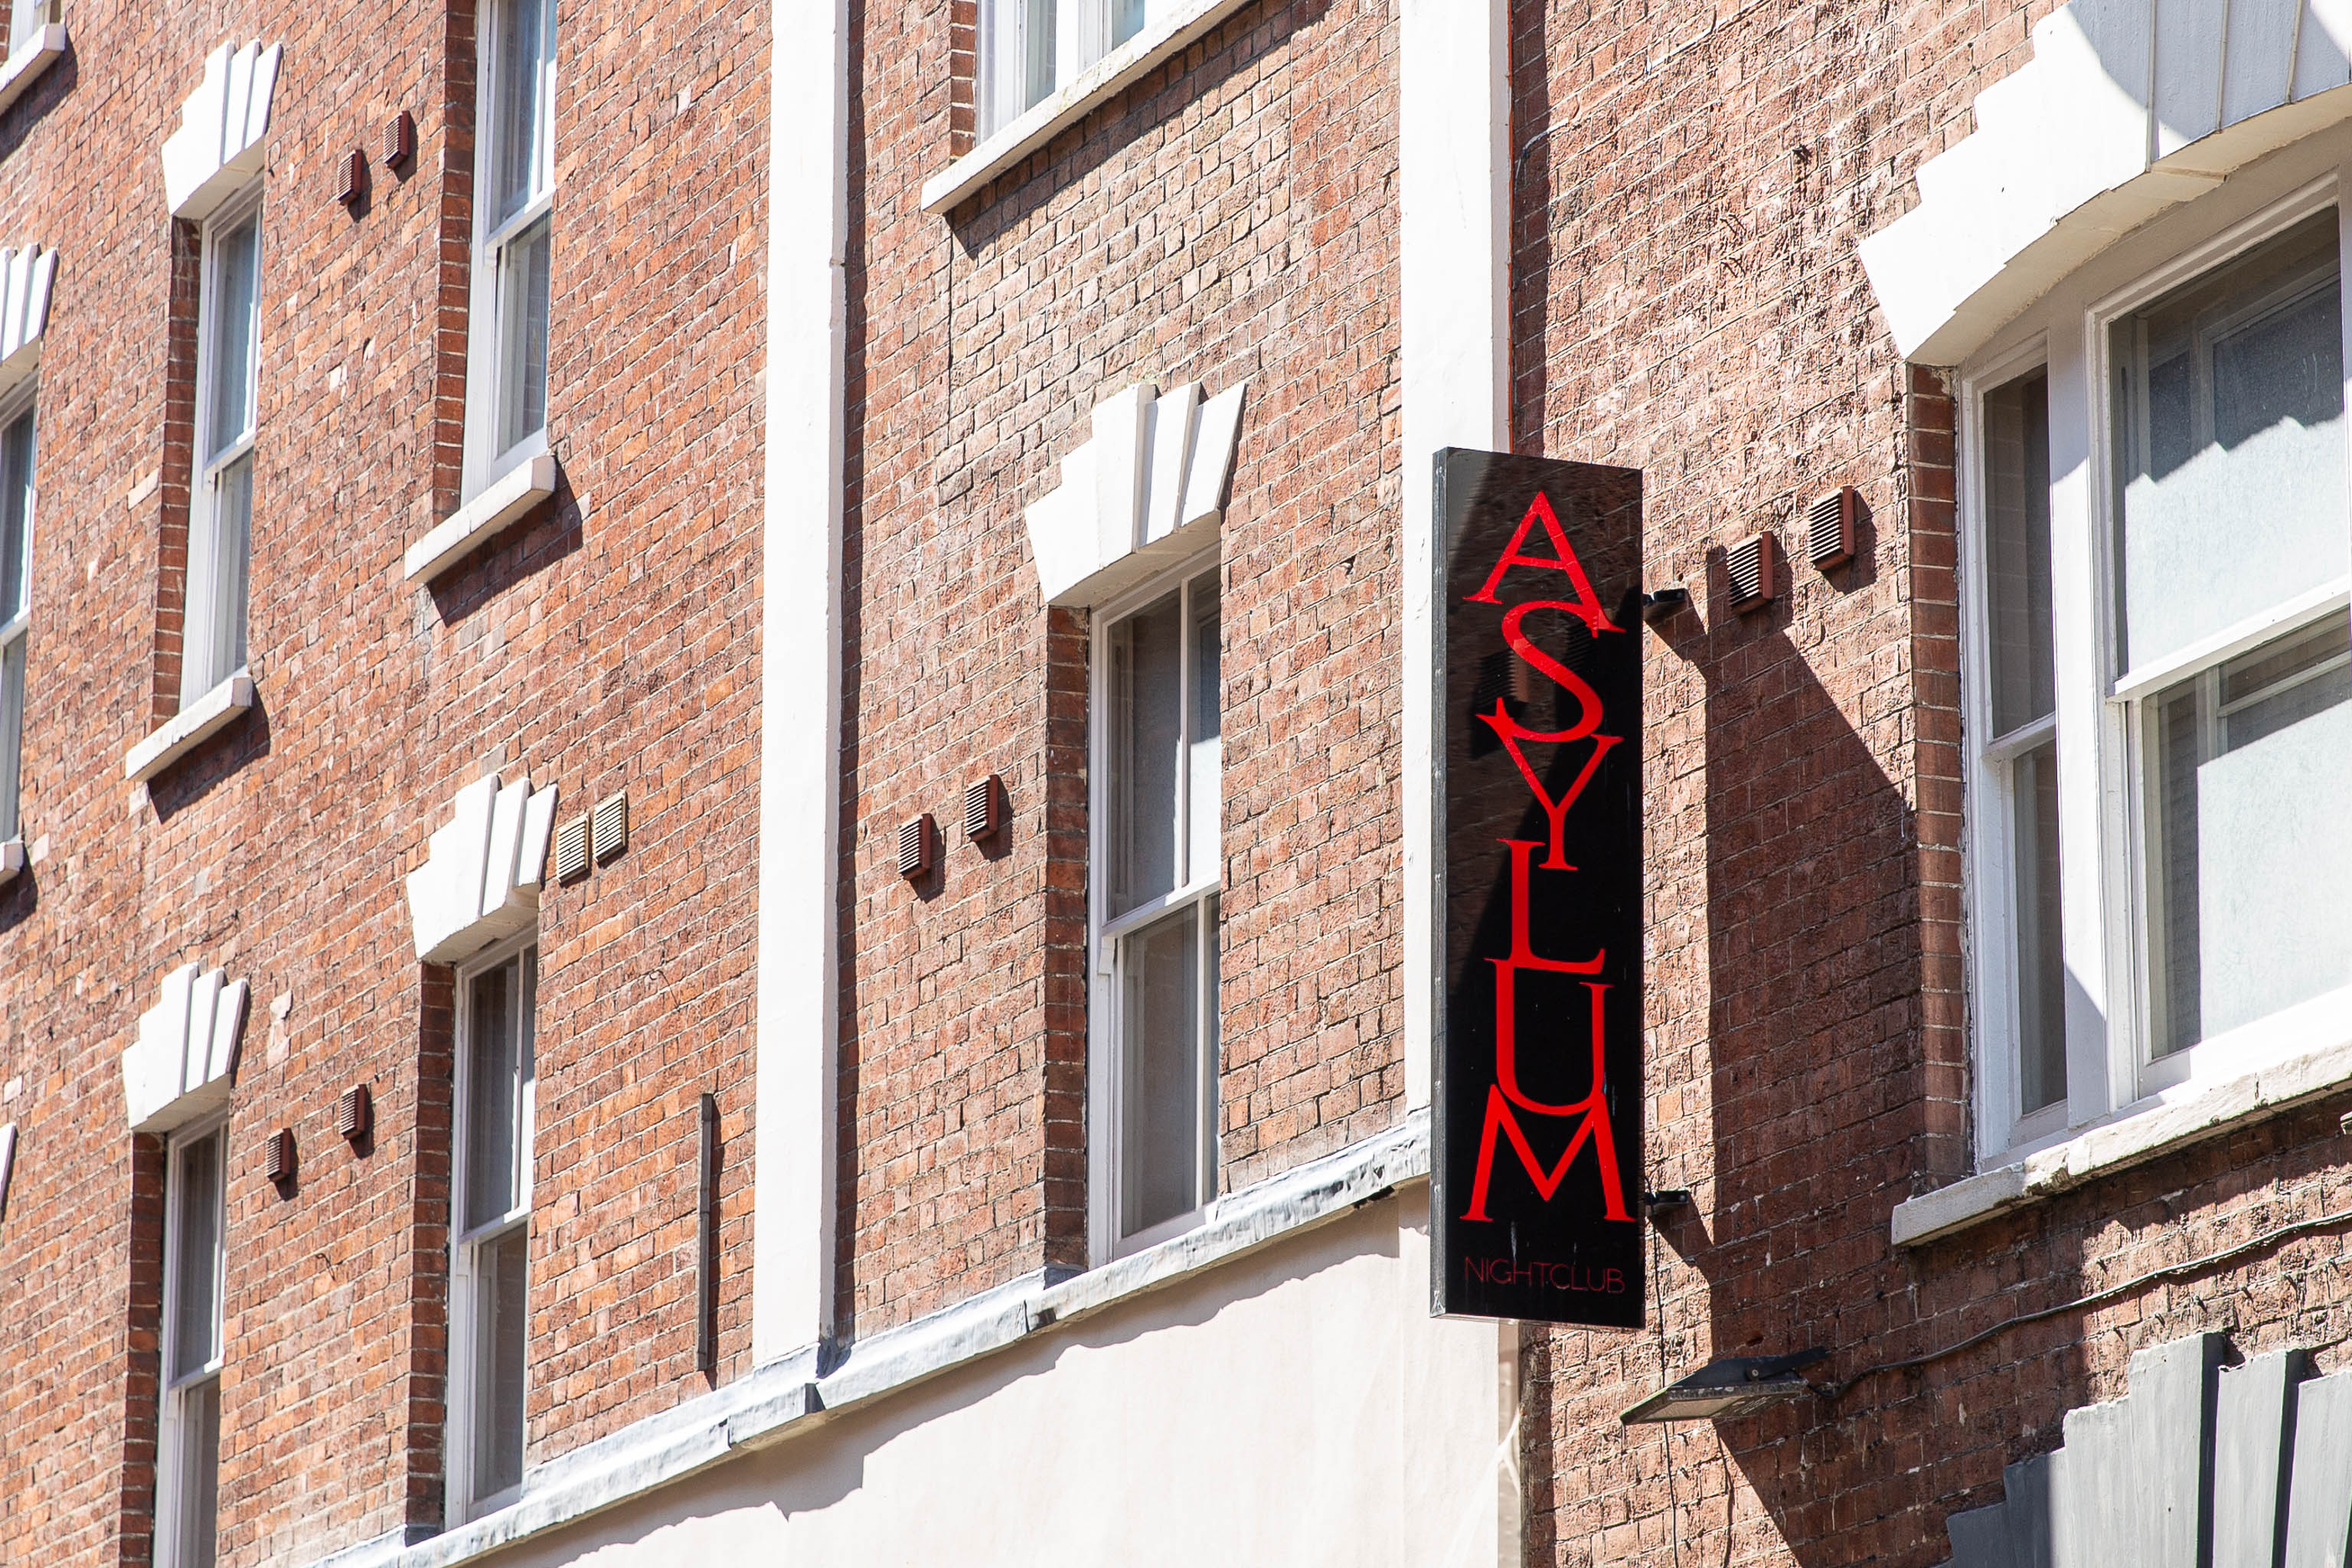 Asylum
I like the design. I don't think the nightclub's really for me, though.
